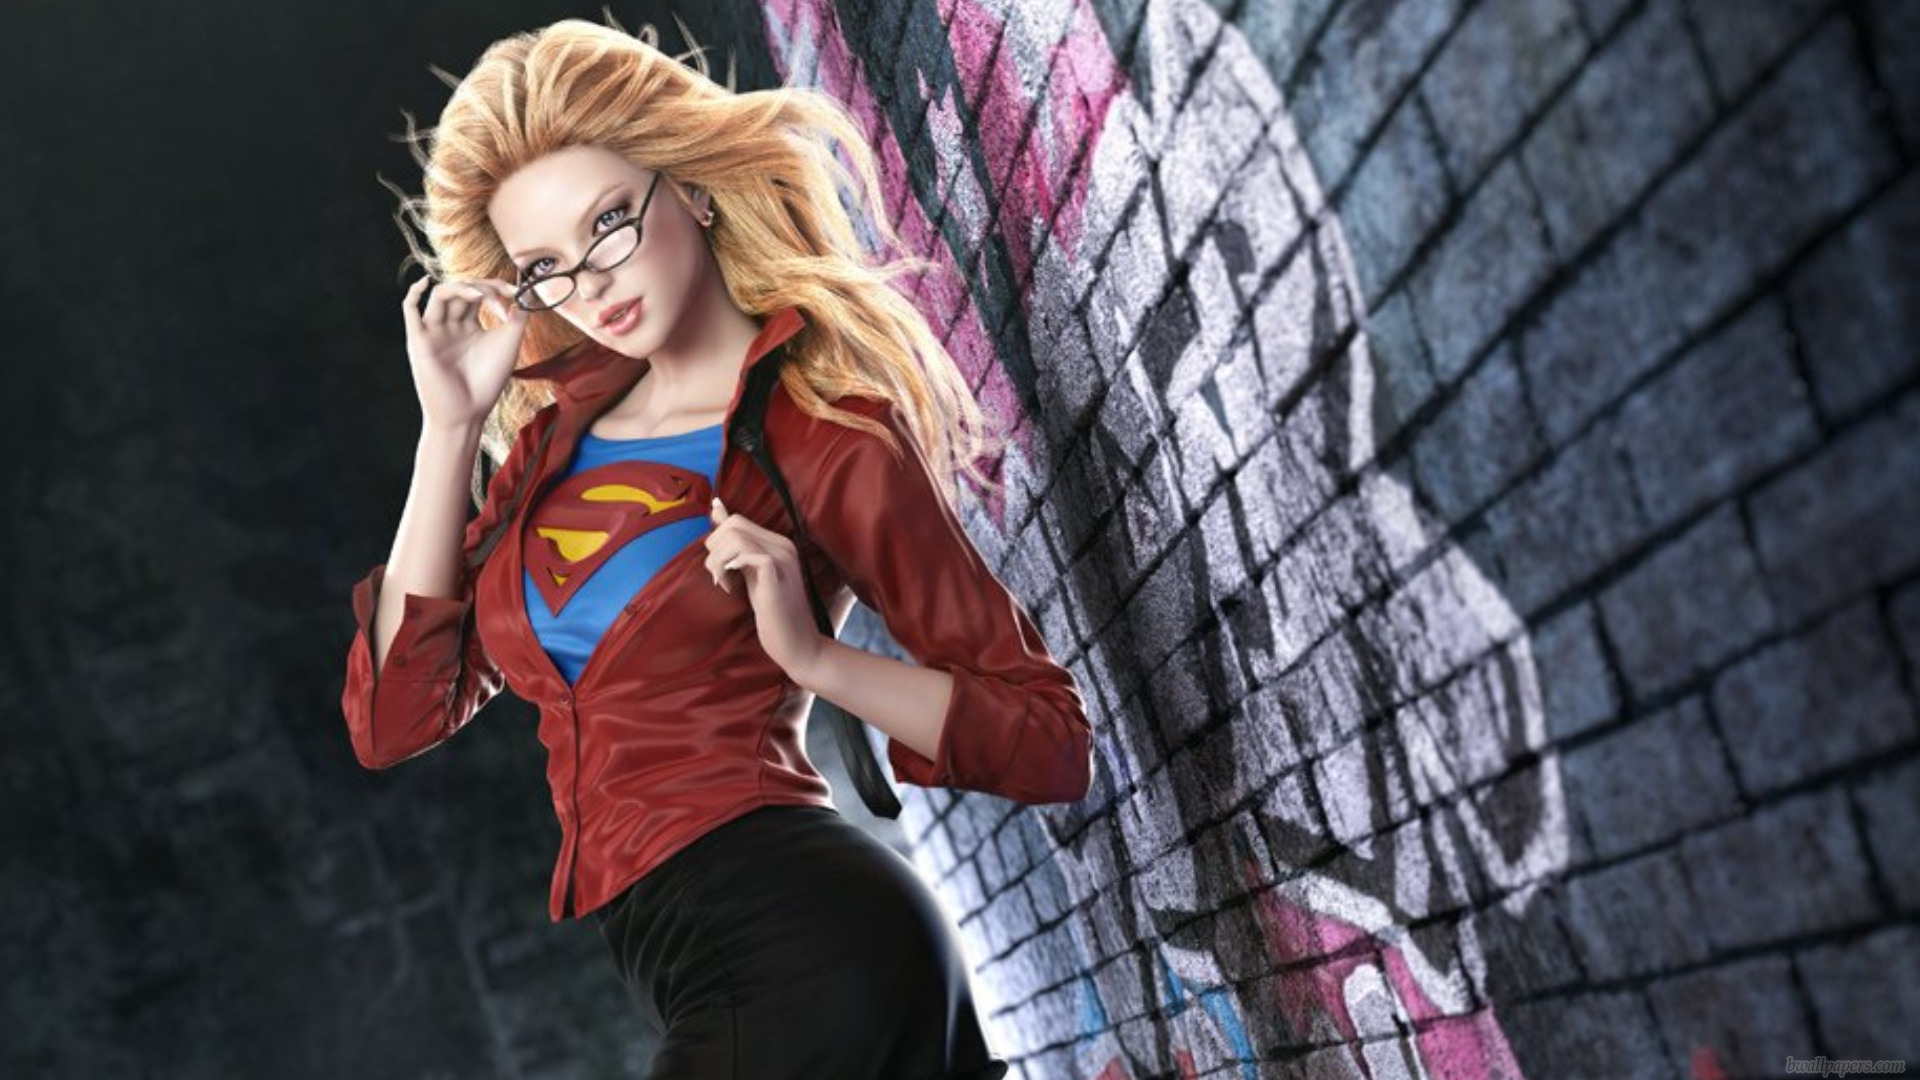 Supergirl Wallpapers - Wallpaper, High Definition, High Quality